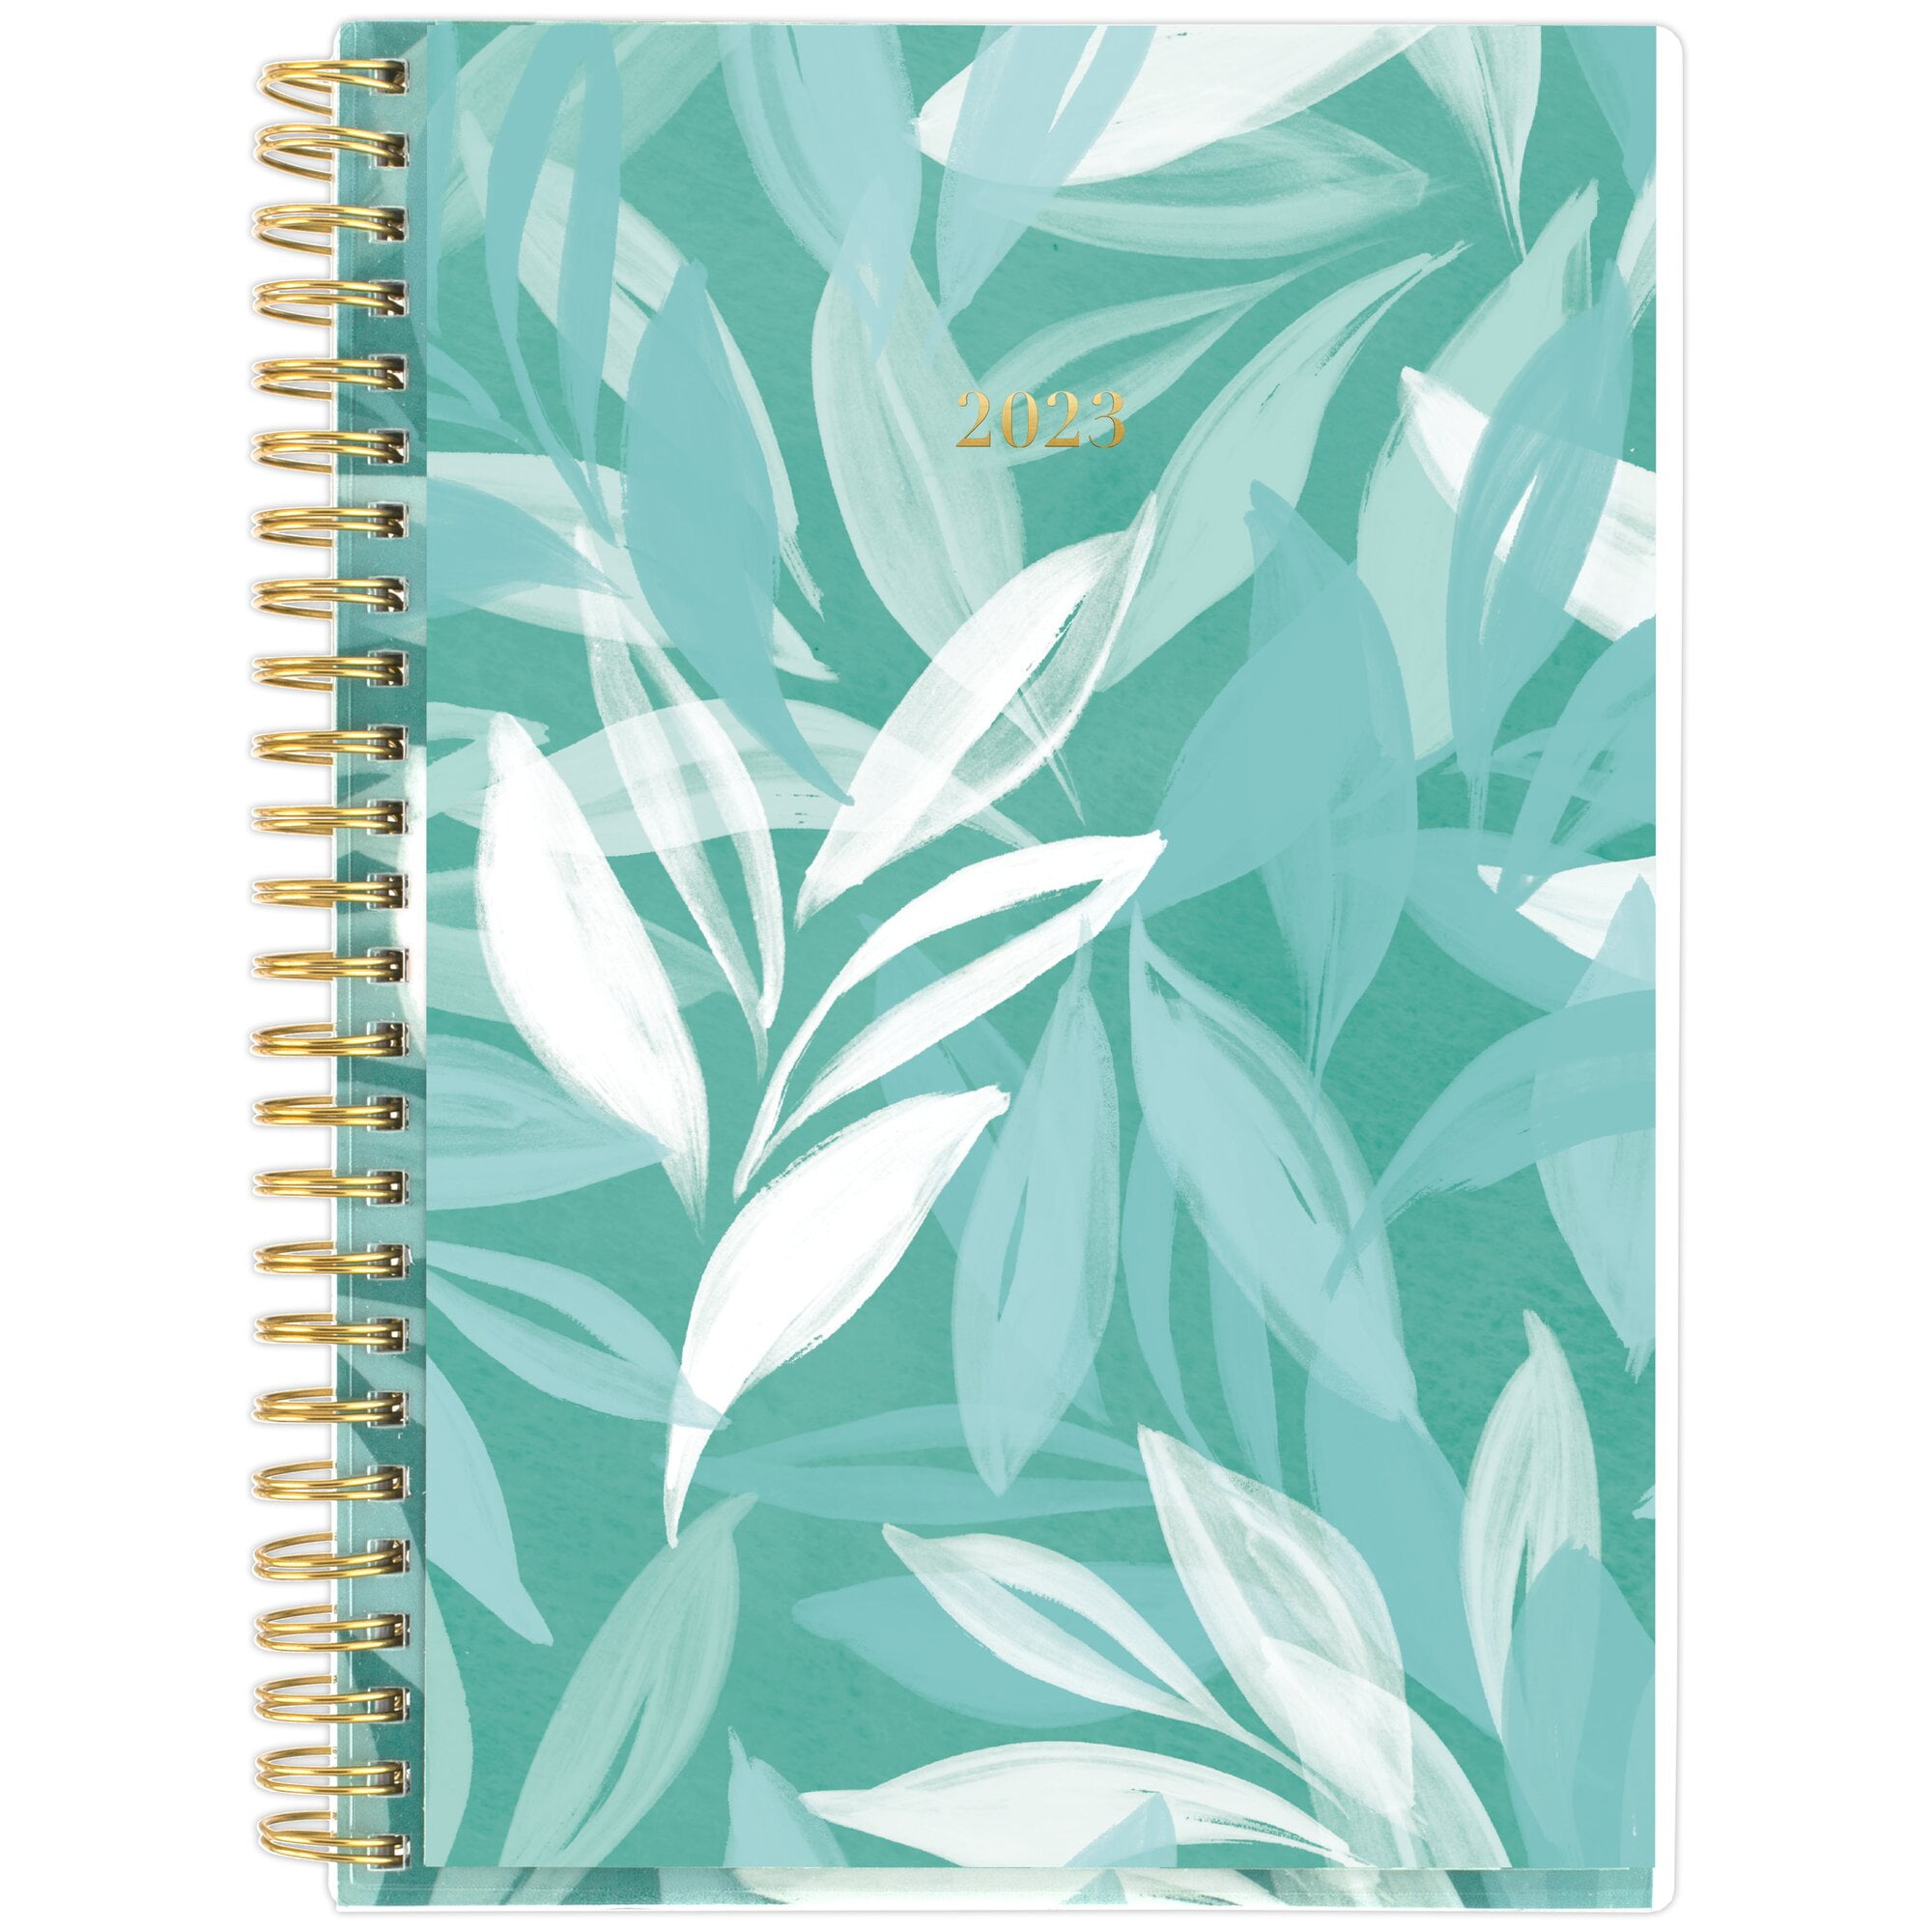 Casey 2022 Weekly & Monthly Planner by Cambridge 5-1/2 x 8-1/2 Small 1566-200 